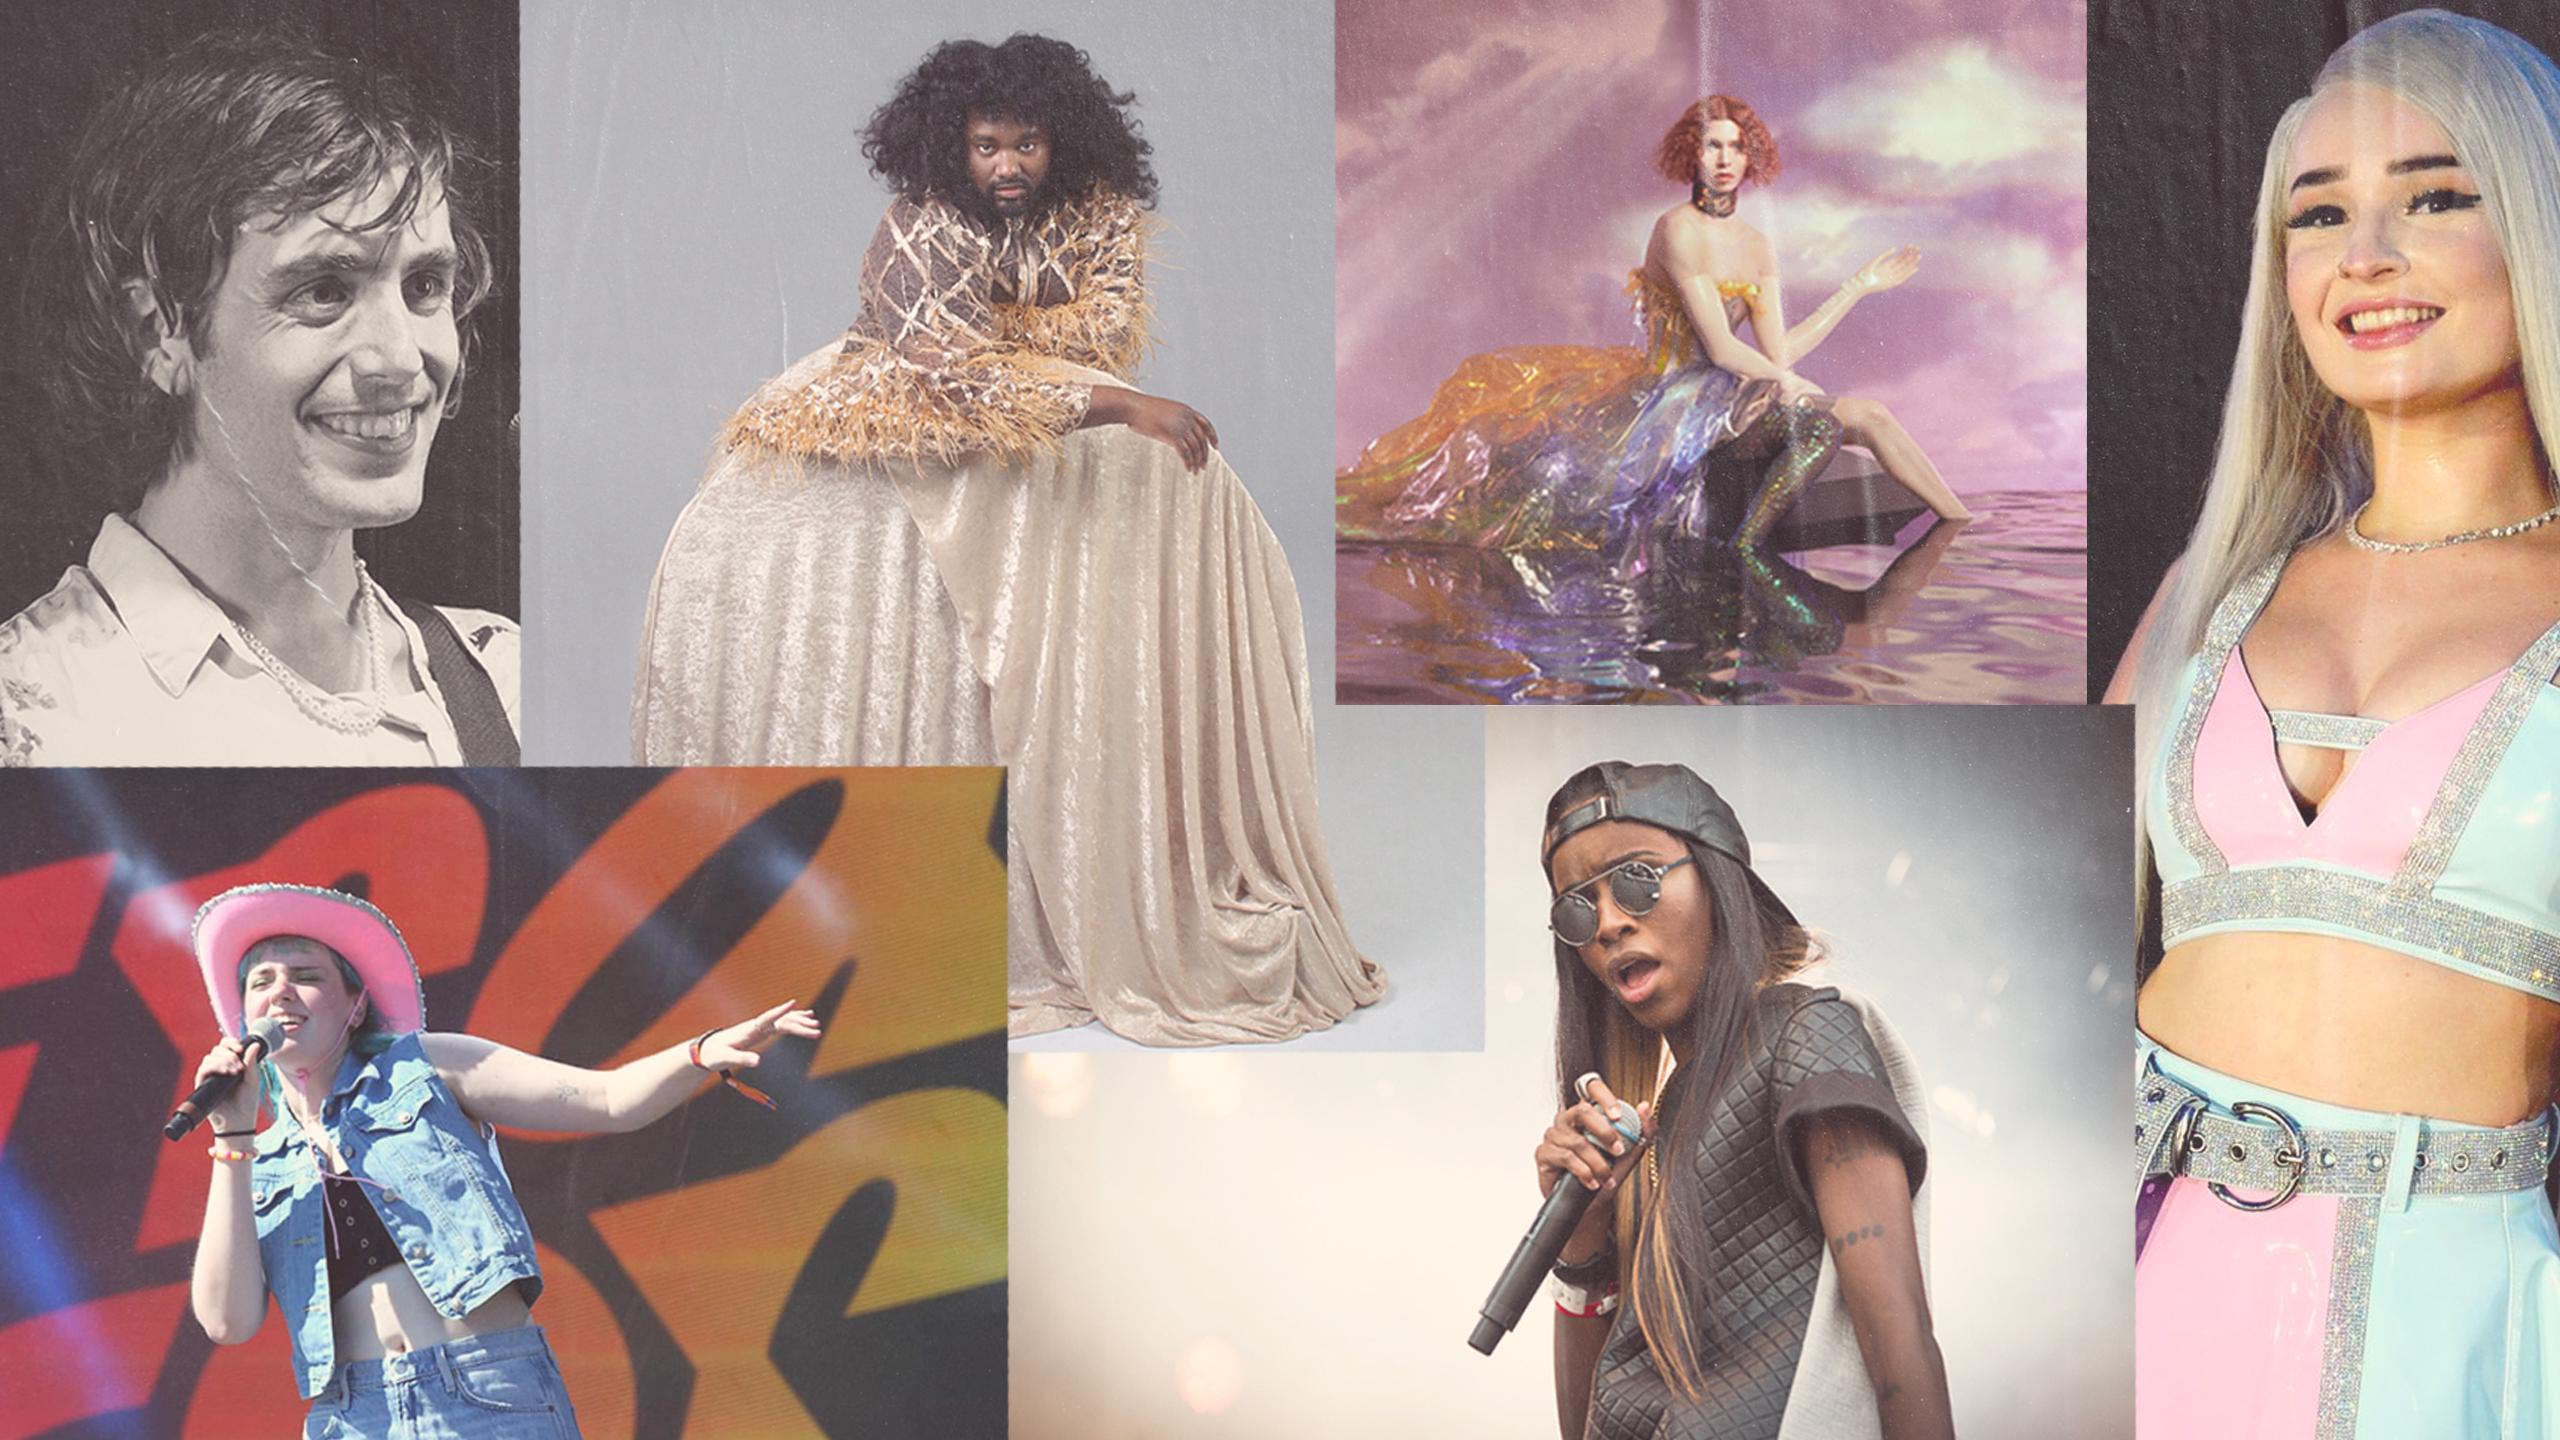 Collage of trans musicians